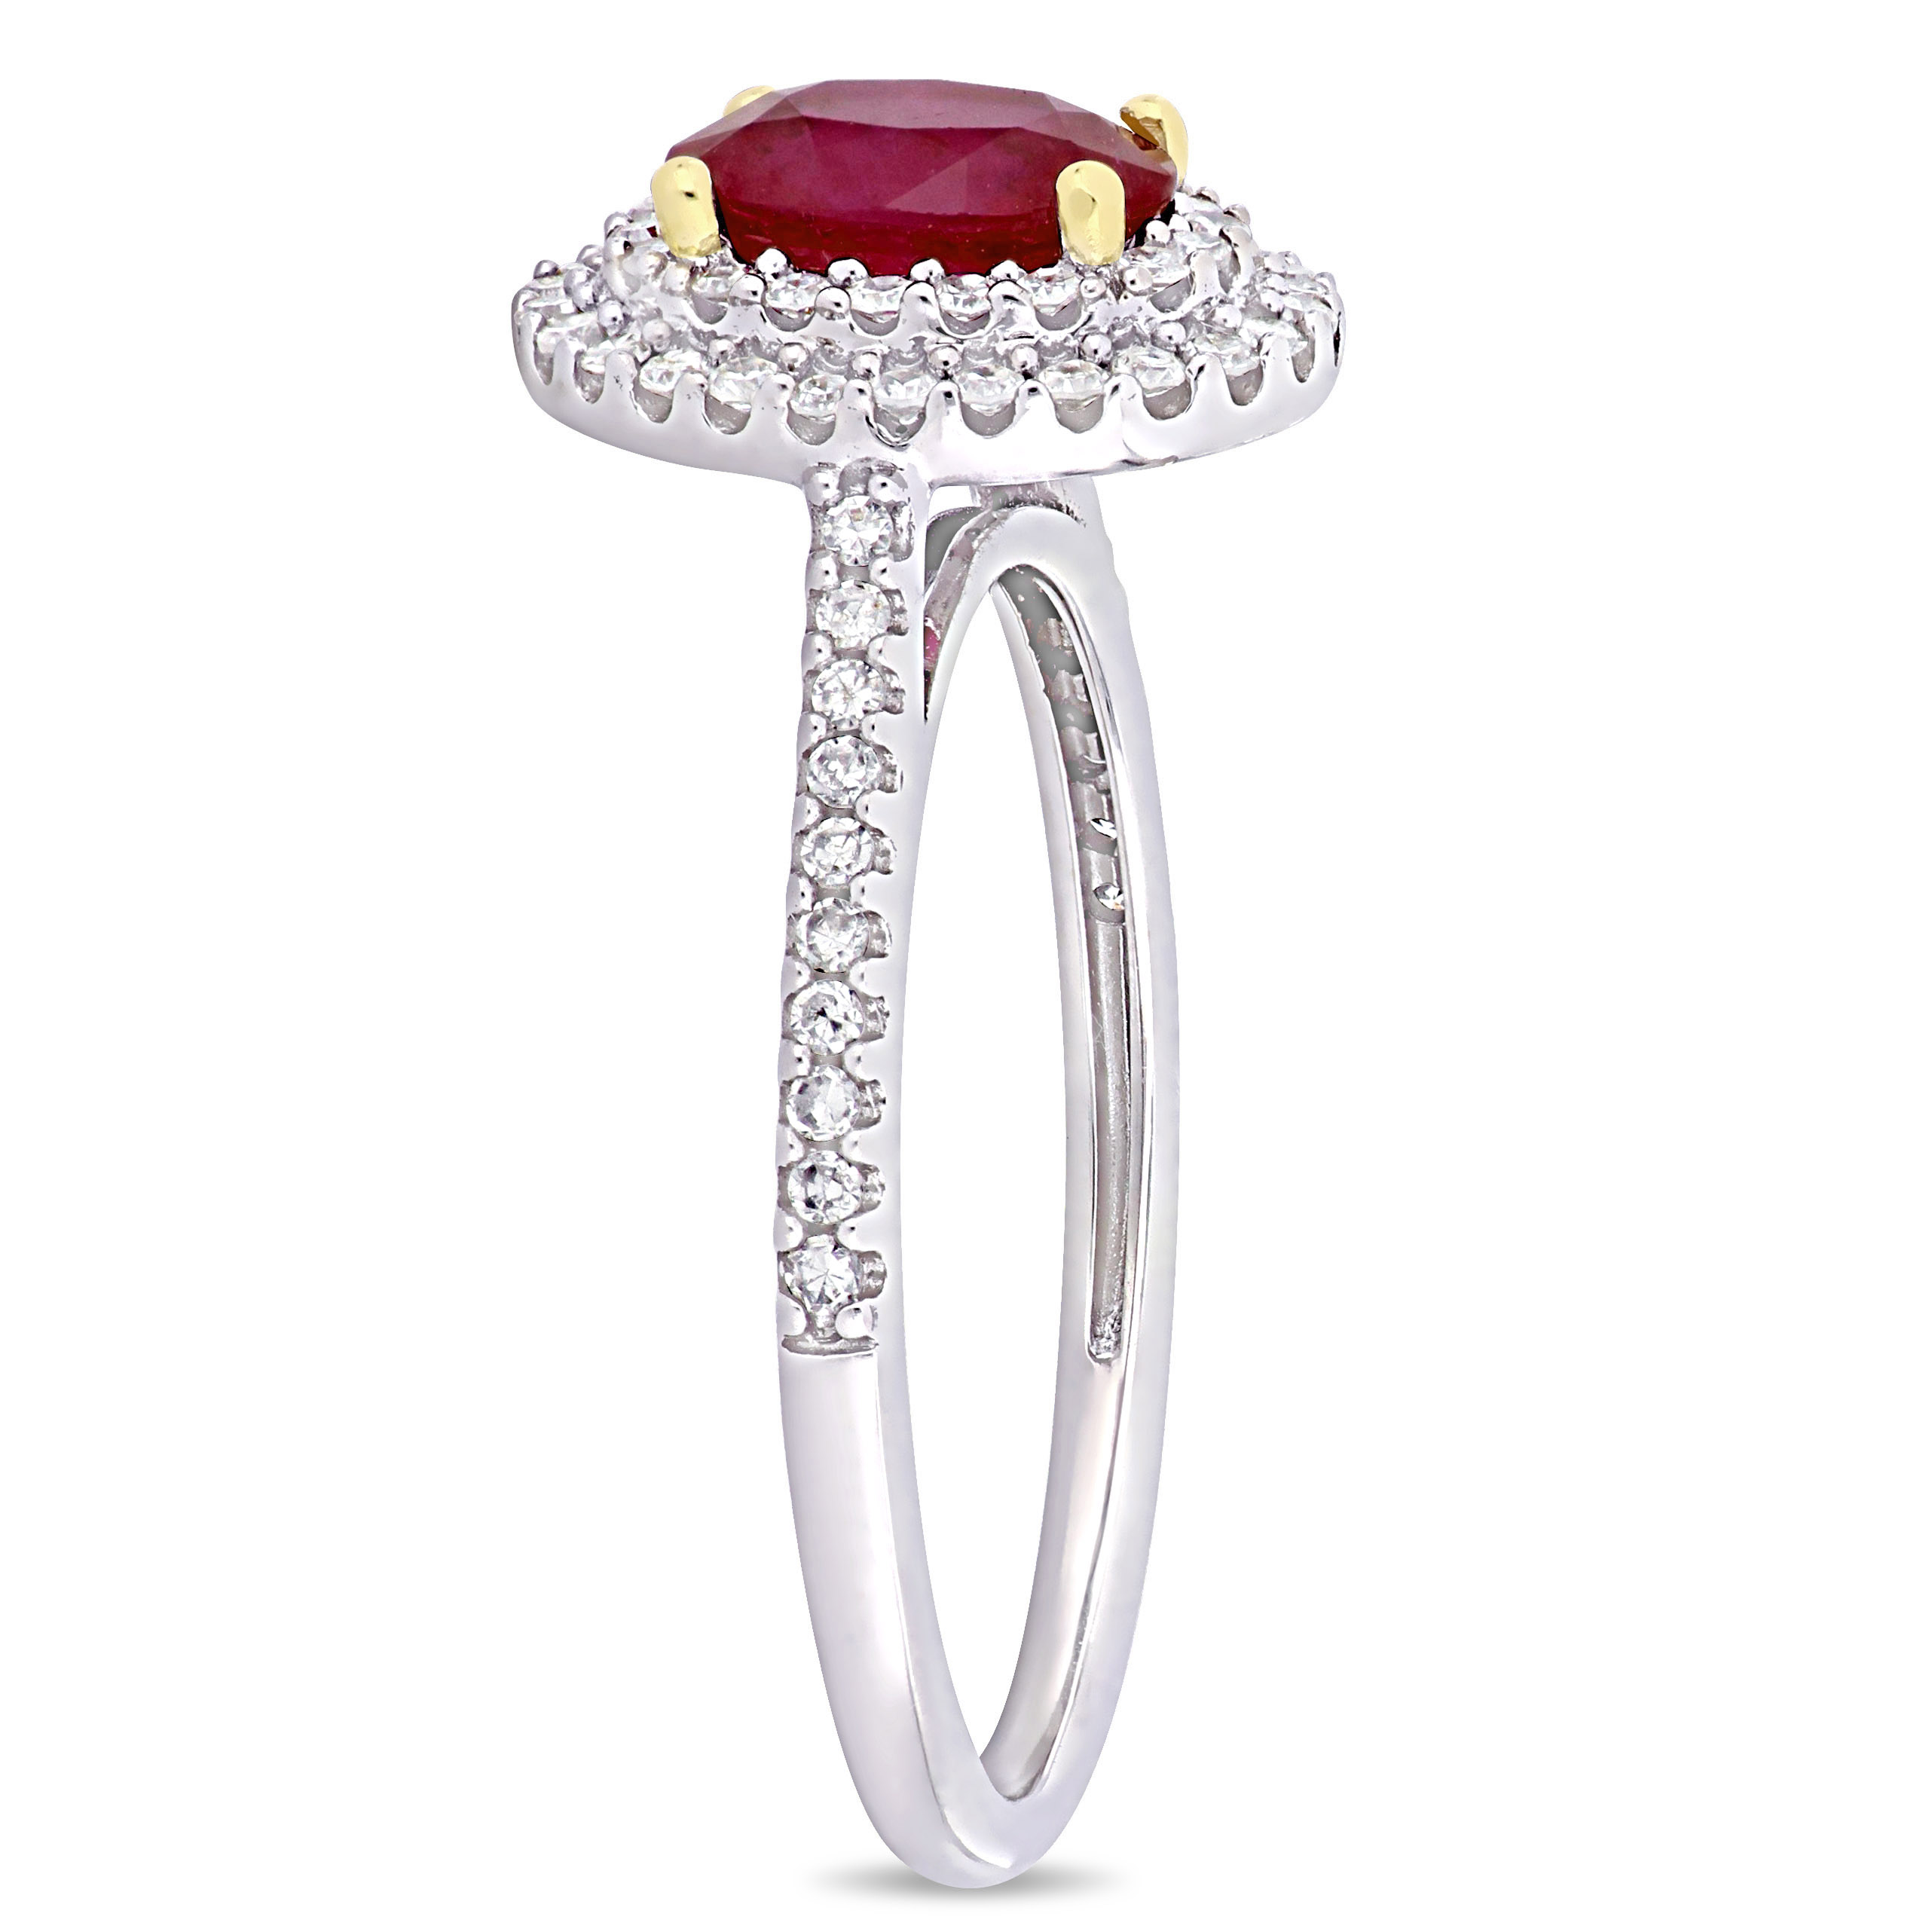 7/8 Ct TGW Oval Ruby and 1/3 Ct TW Diamond Double Halo Ring in 2-tone 14k White & Yellow Gold